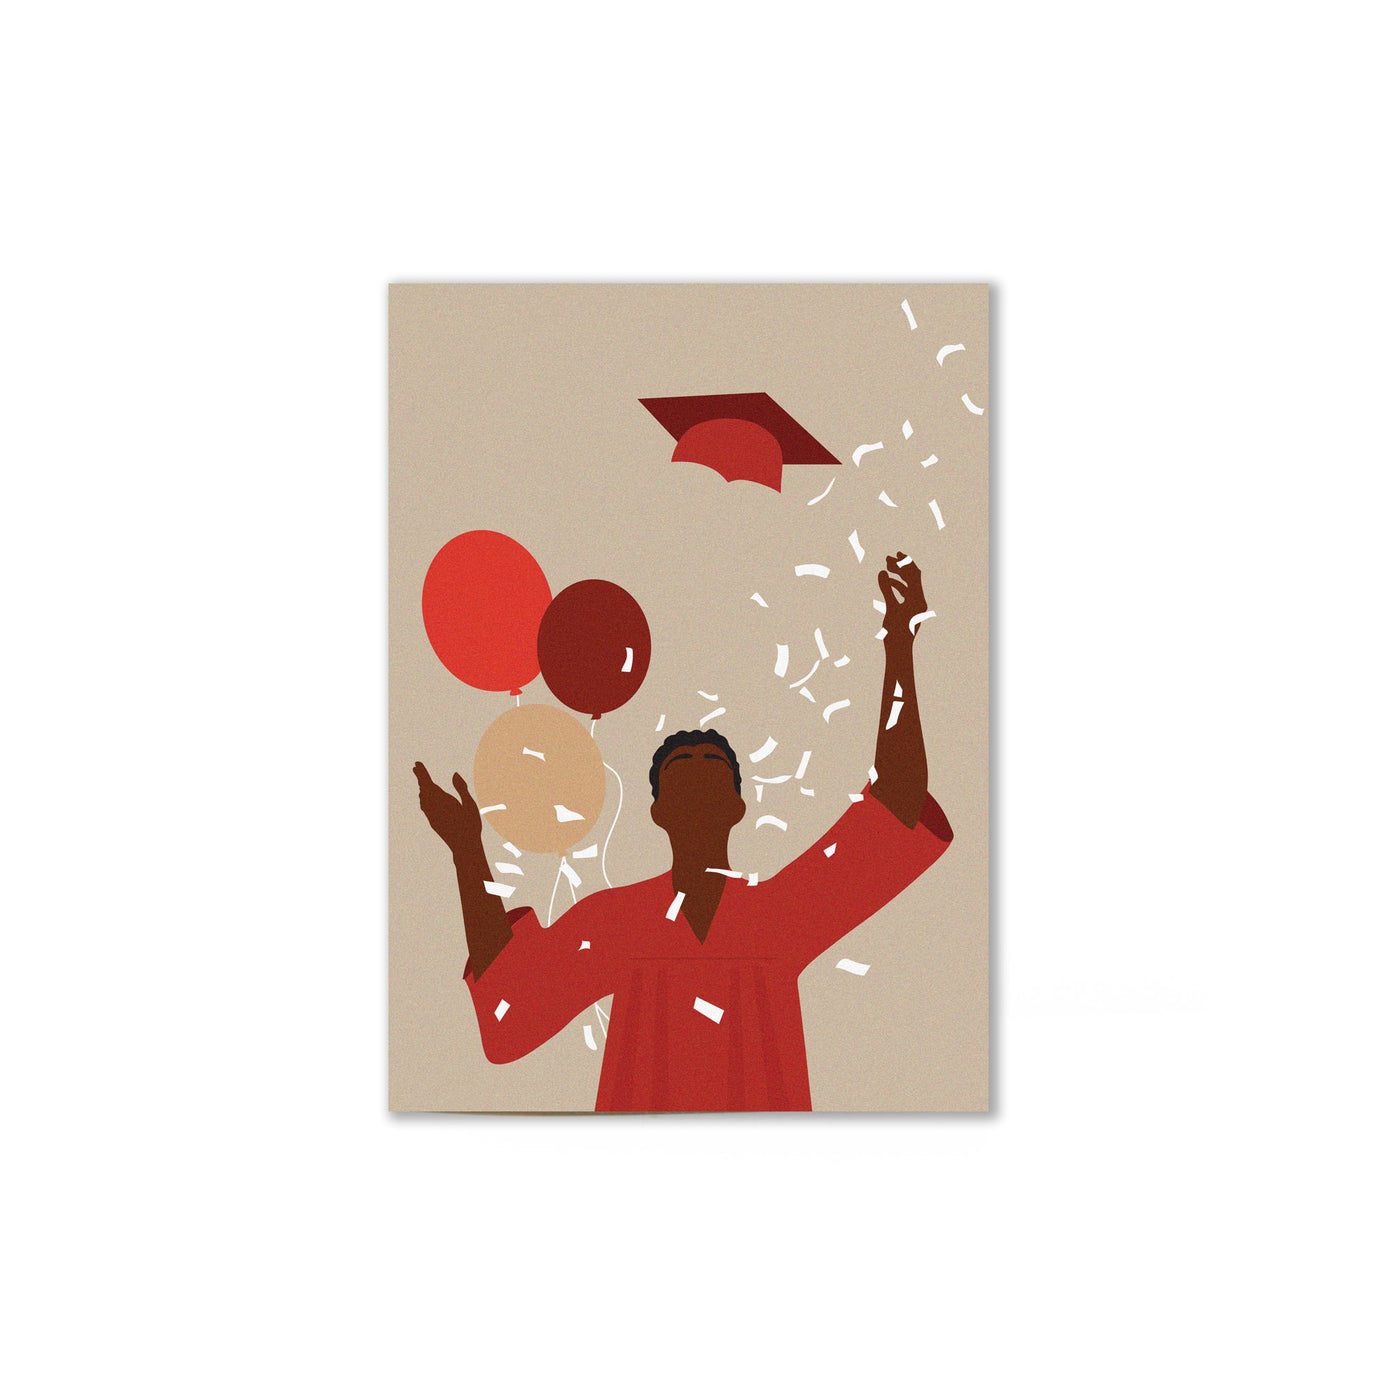 cream colored card that illustrates a black person throwing up graduation cap with red toned balloons and gown. 